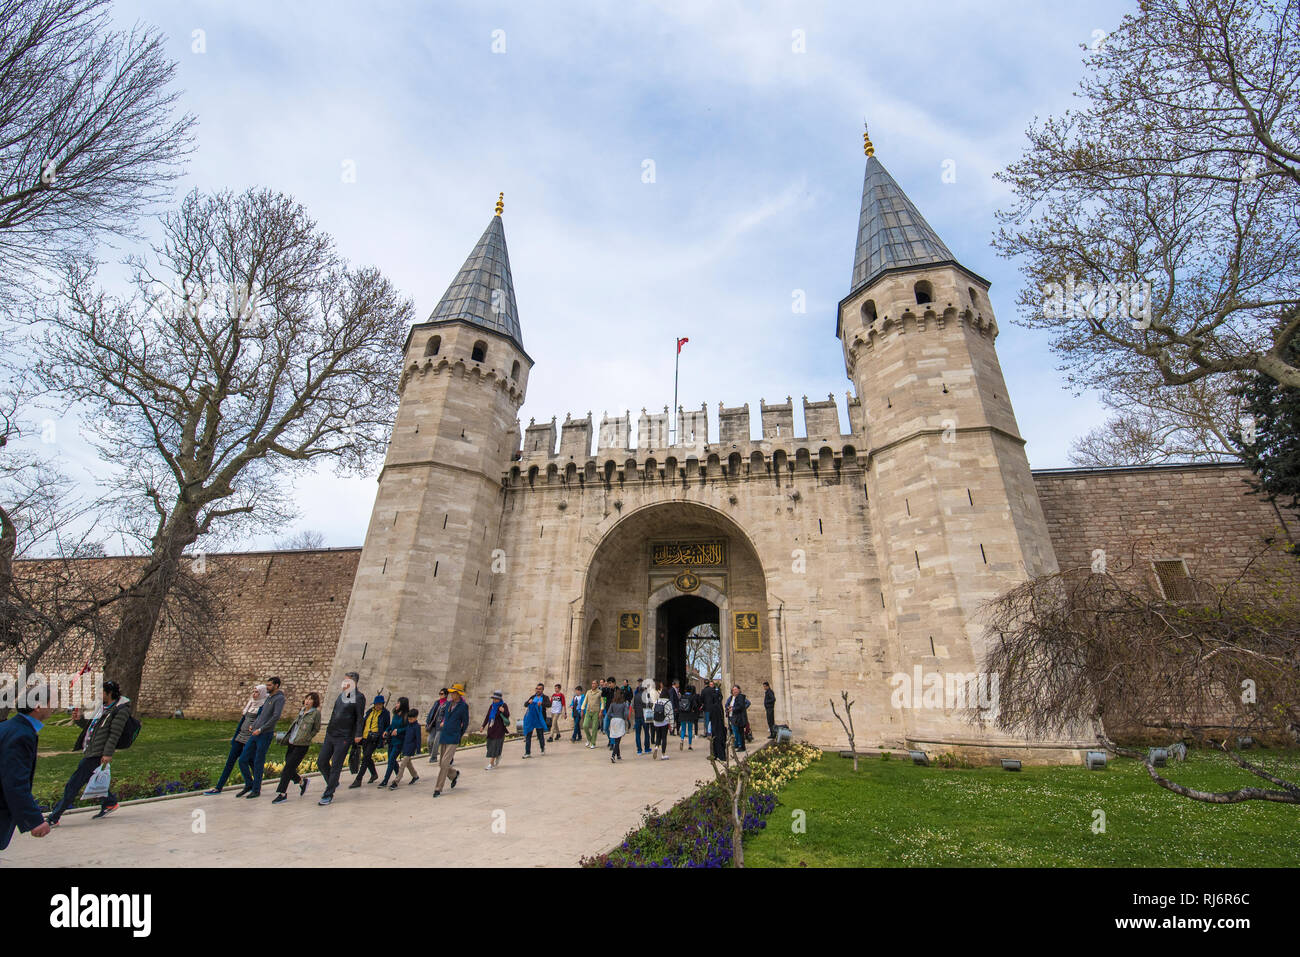 Topkapi palace. The Gate of Salutation, entrance to the Second courtyard of Topkapi Palace. It was the residence of the Sultans for 400 years Istanbul Stock Photo